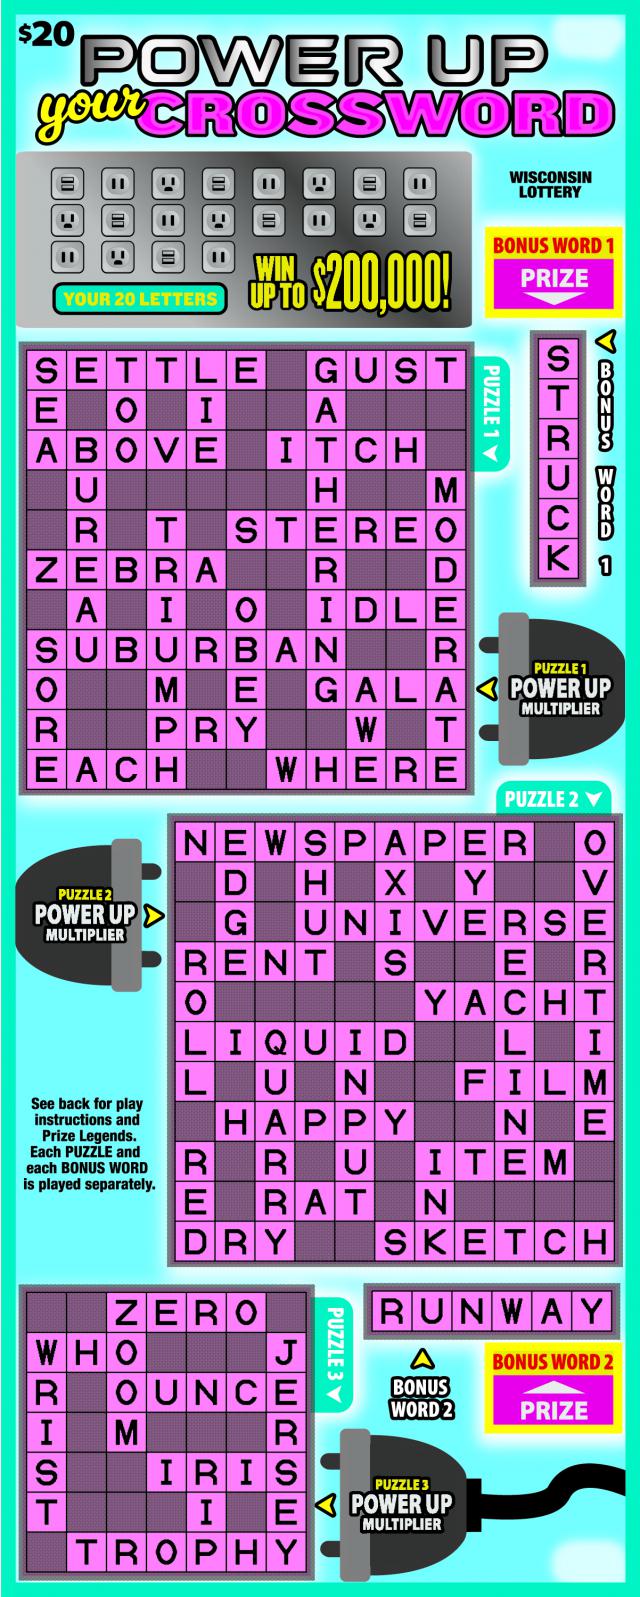 Power up Your Crossword instant scratch ticket from Wisconsin Lottery - unscratched